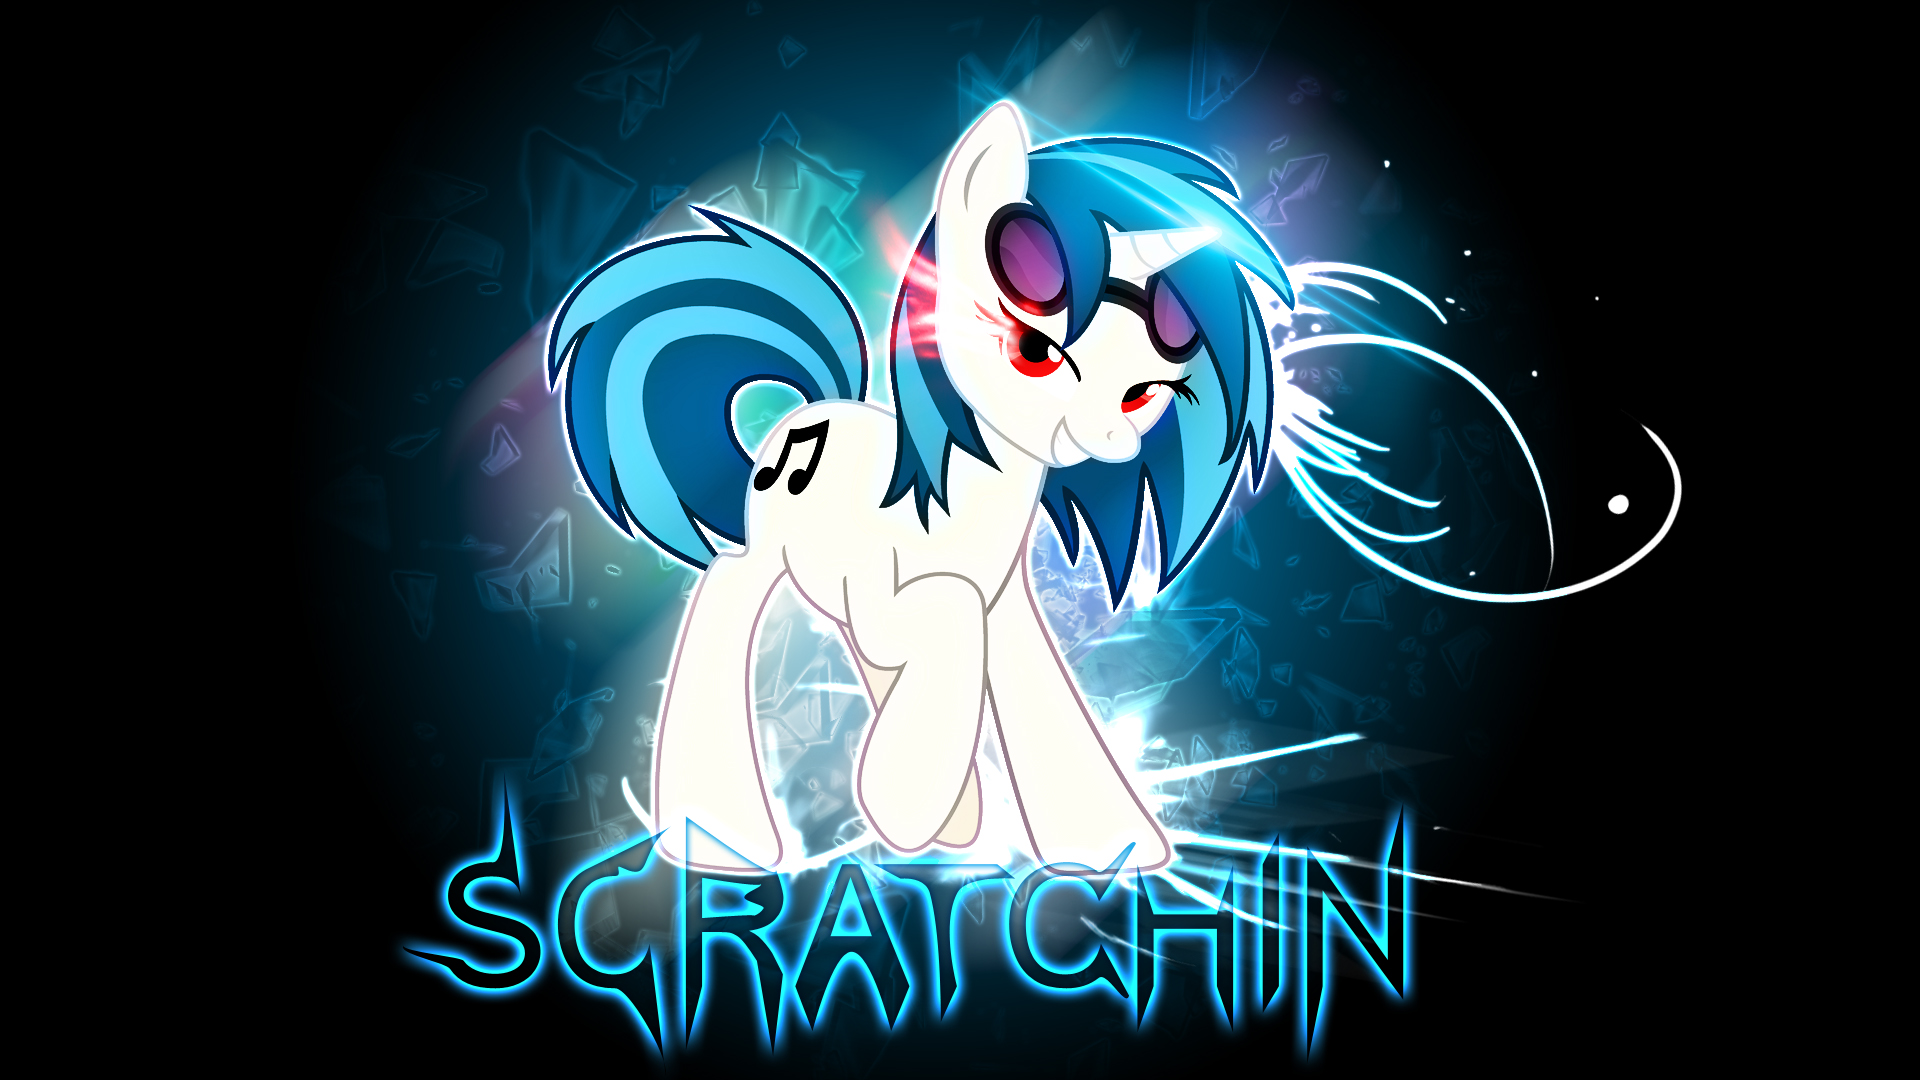 Scratchin by Karl97 and Shelmo69